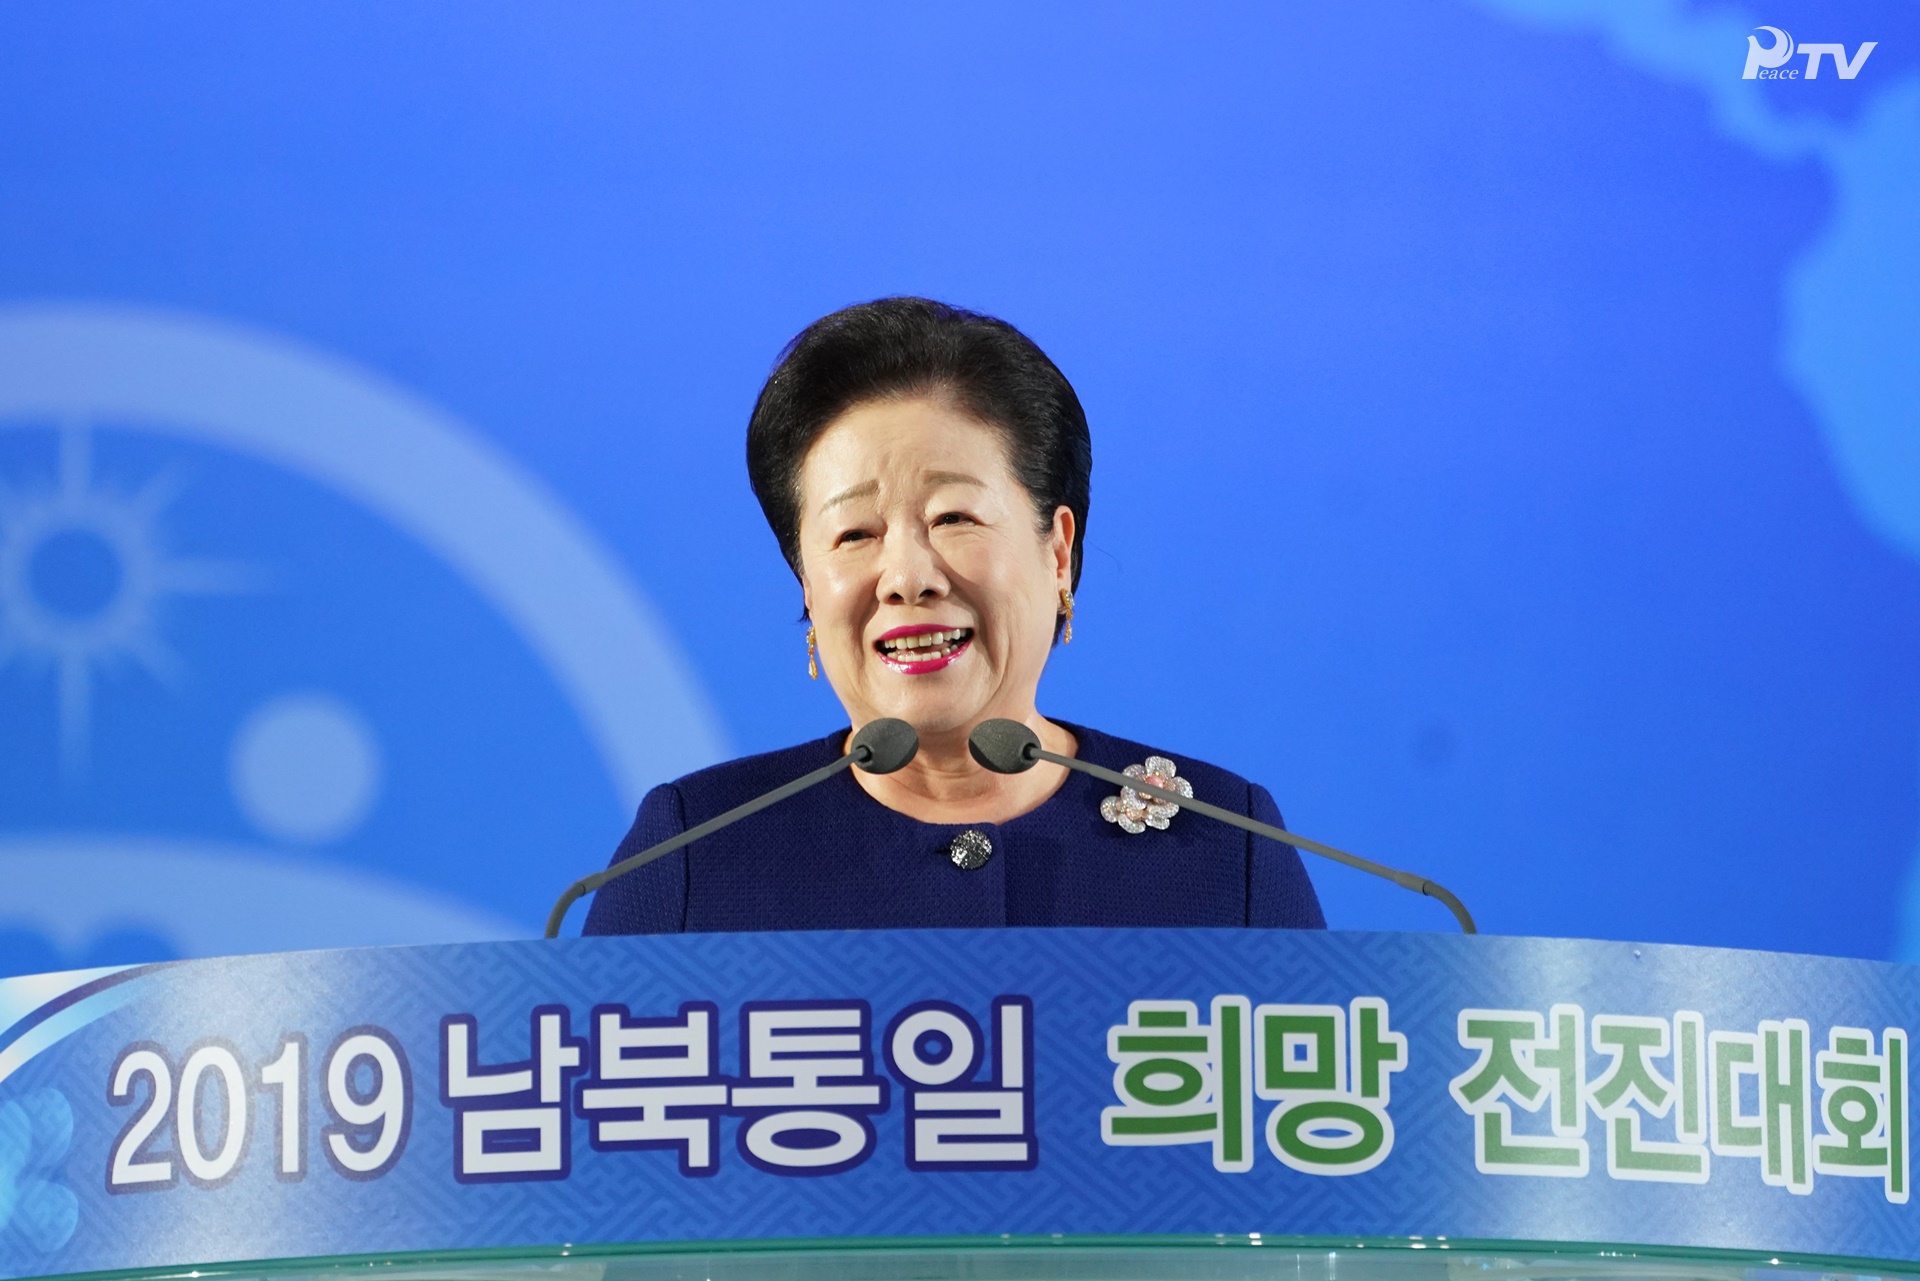 2019 Rally of Hope to Advance the Peaceful Reunification of the Korean Peninsula (September 29, 2019)